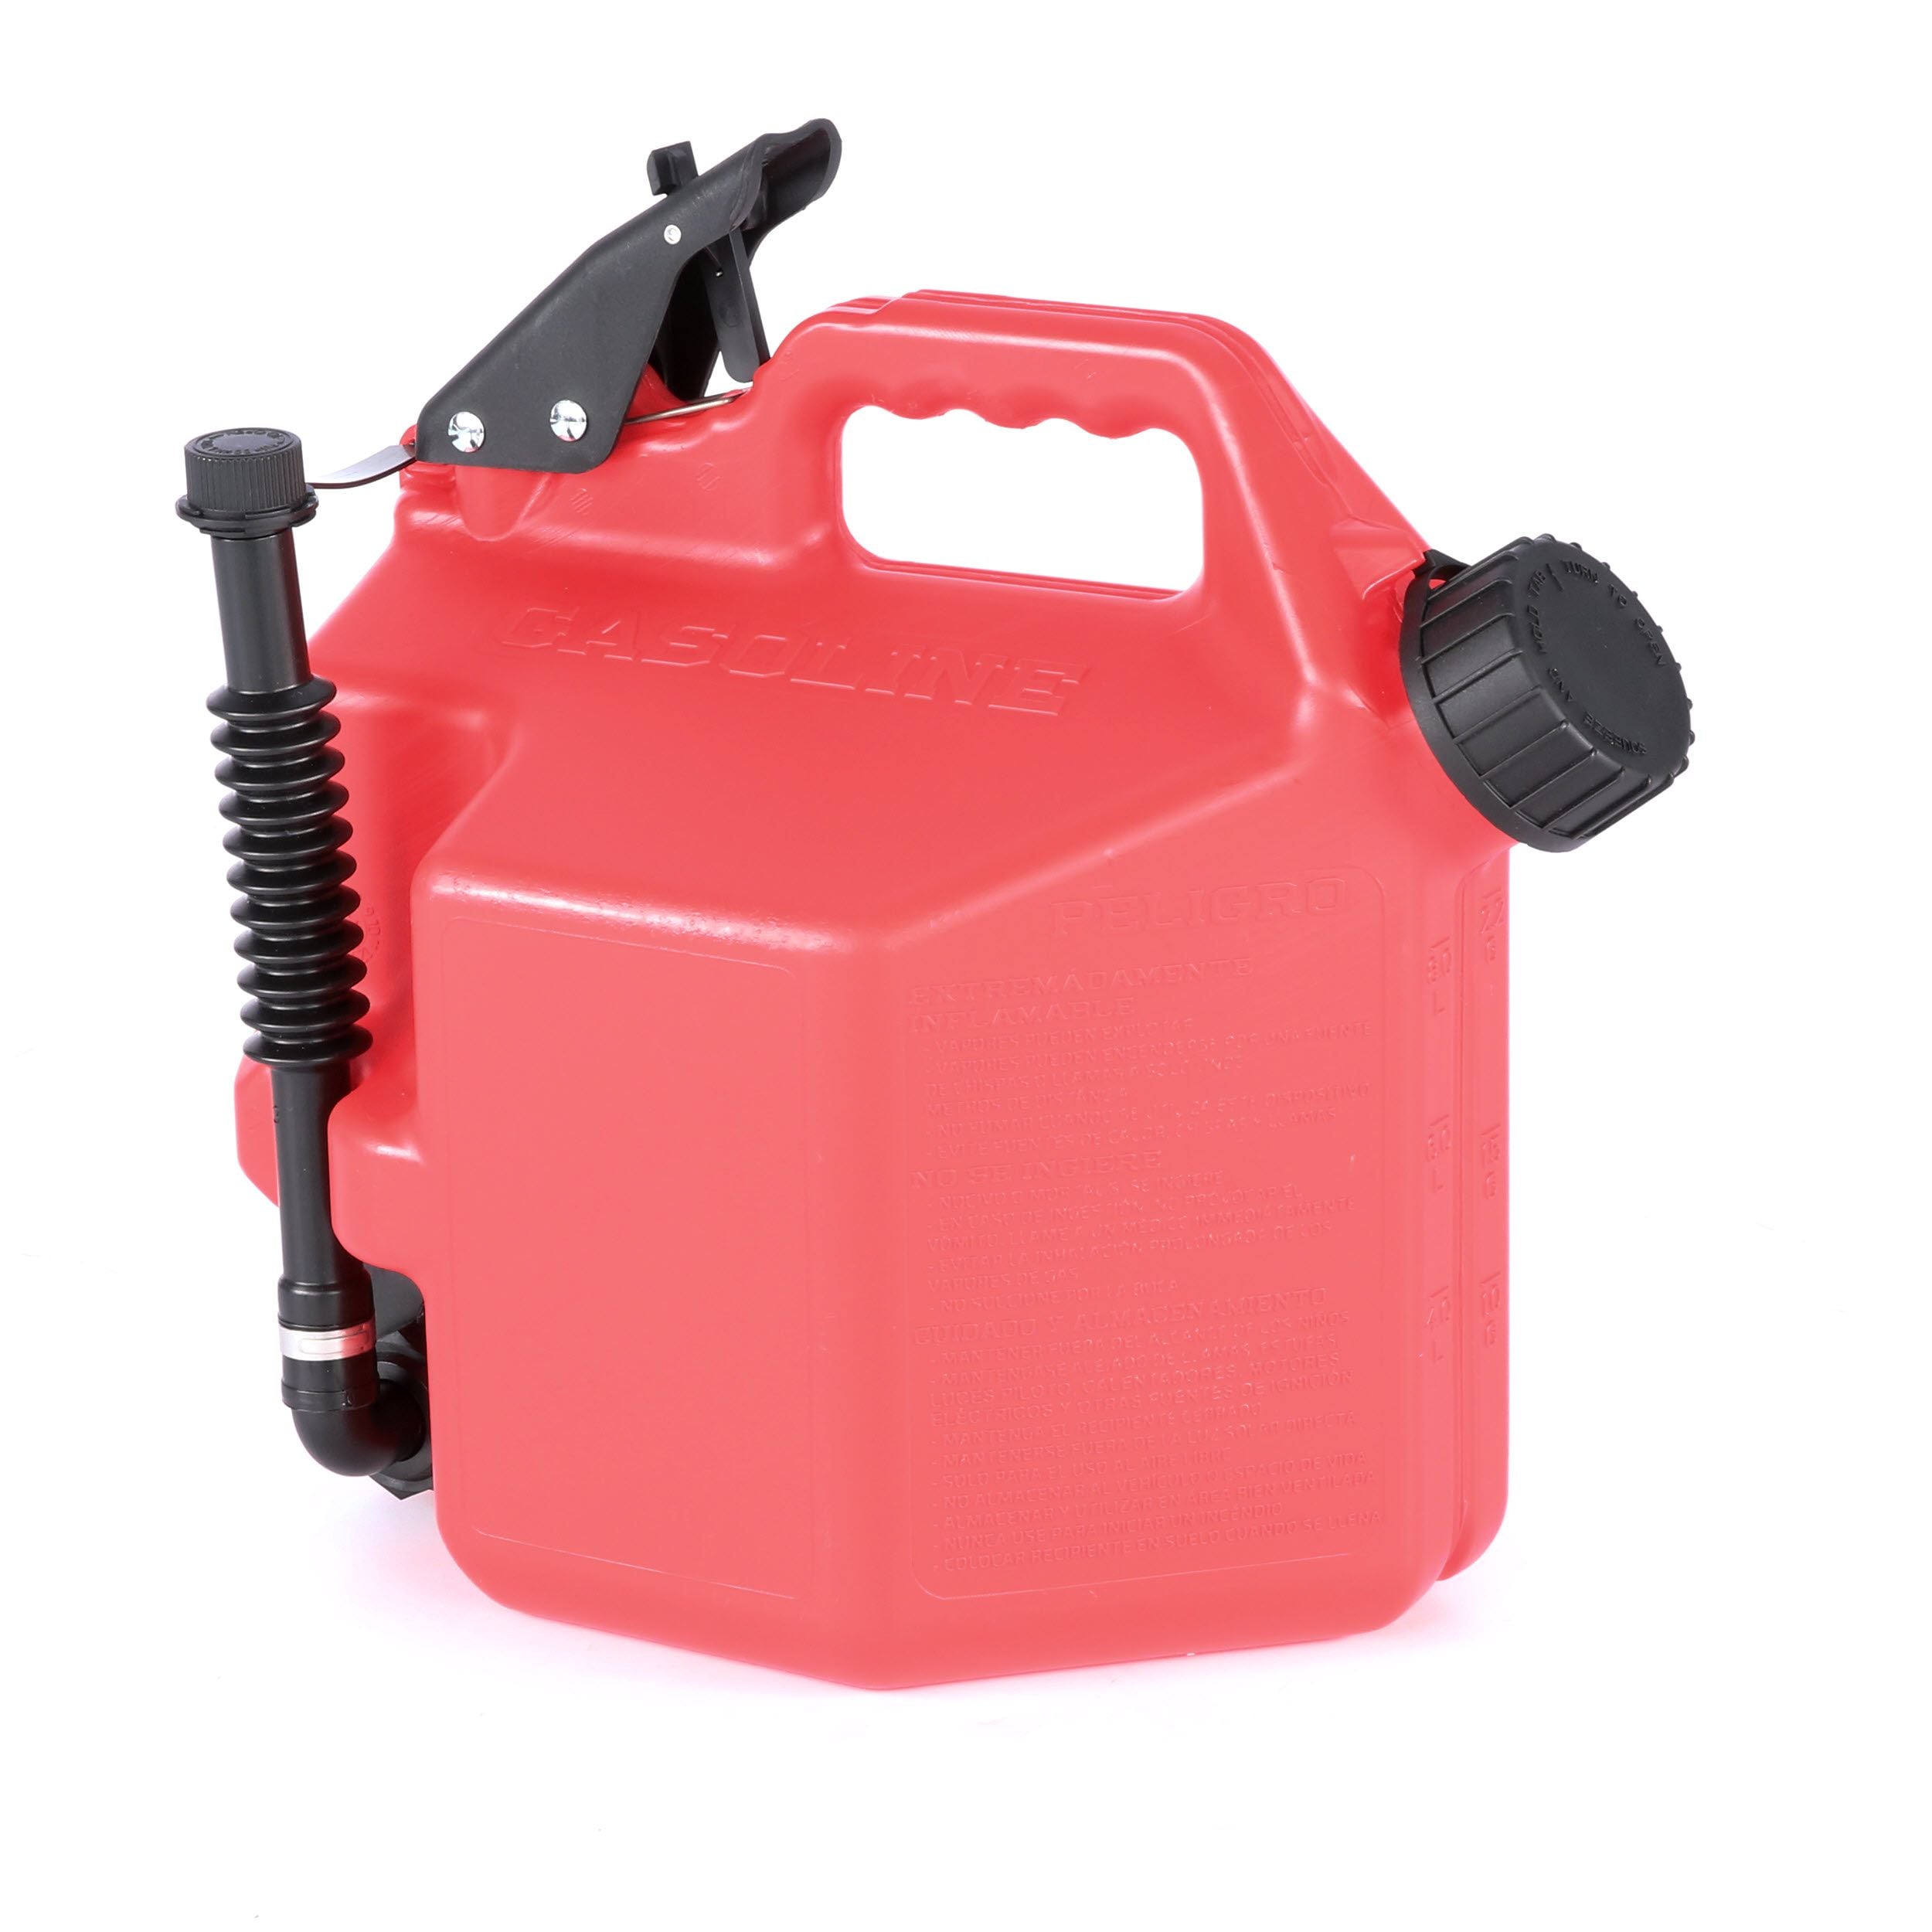 SureCan SUR22G1 2.2 Gal Plastic Gasoline Can with Flexible Rotating Nozzle for sale online 